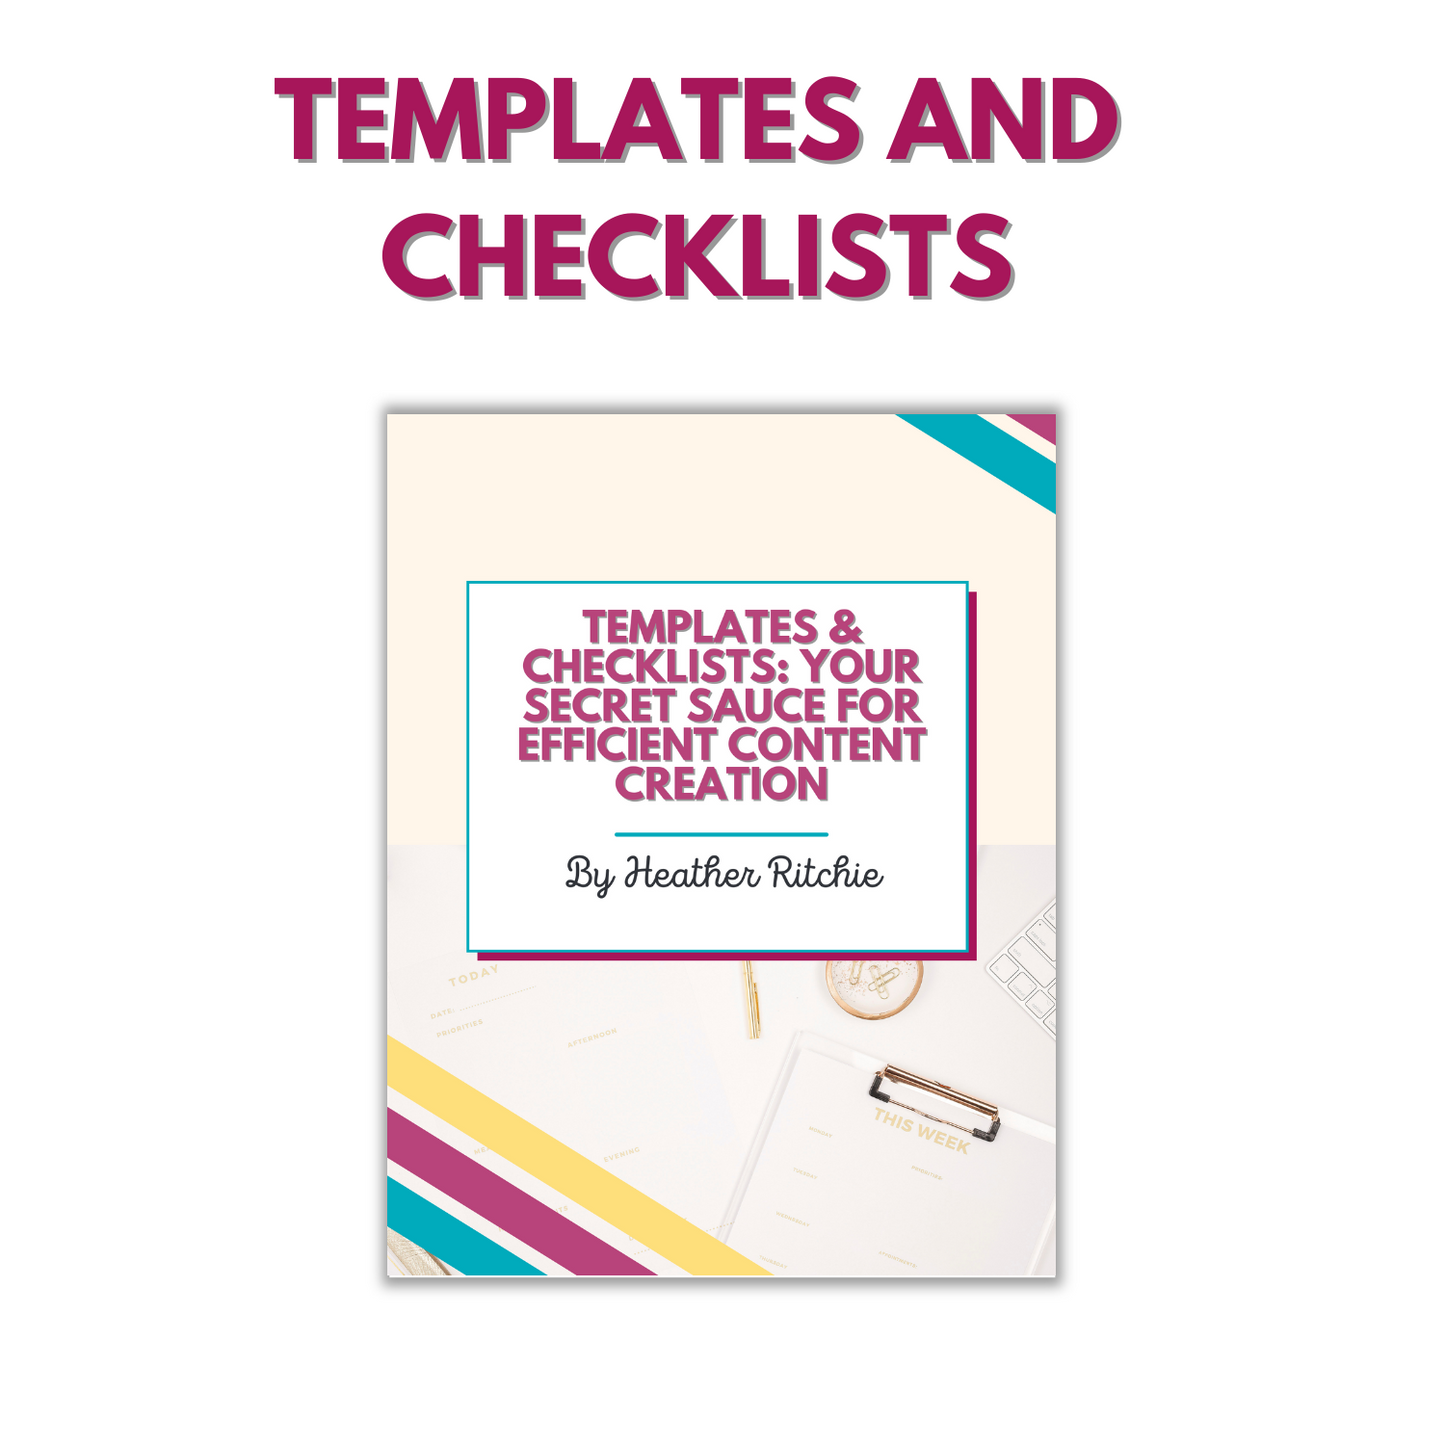 Templates and Checklists: Your Secret Sauce for Efficient Content Creation Workflows